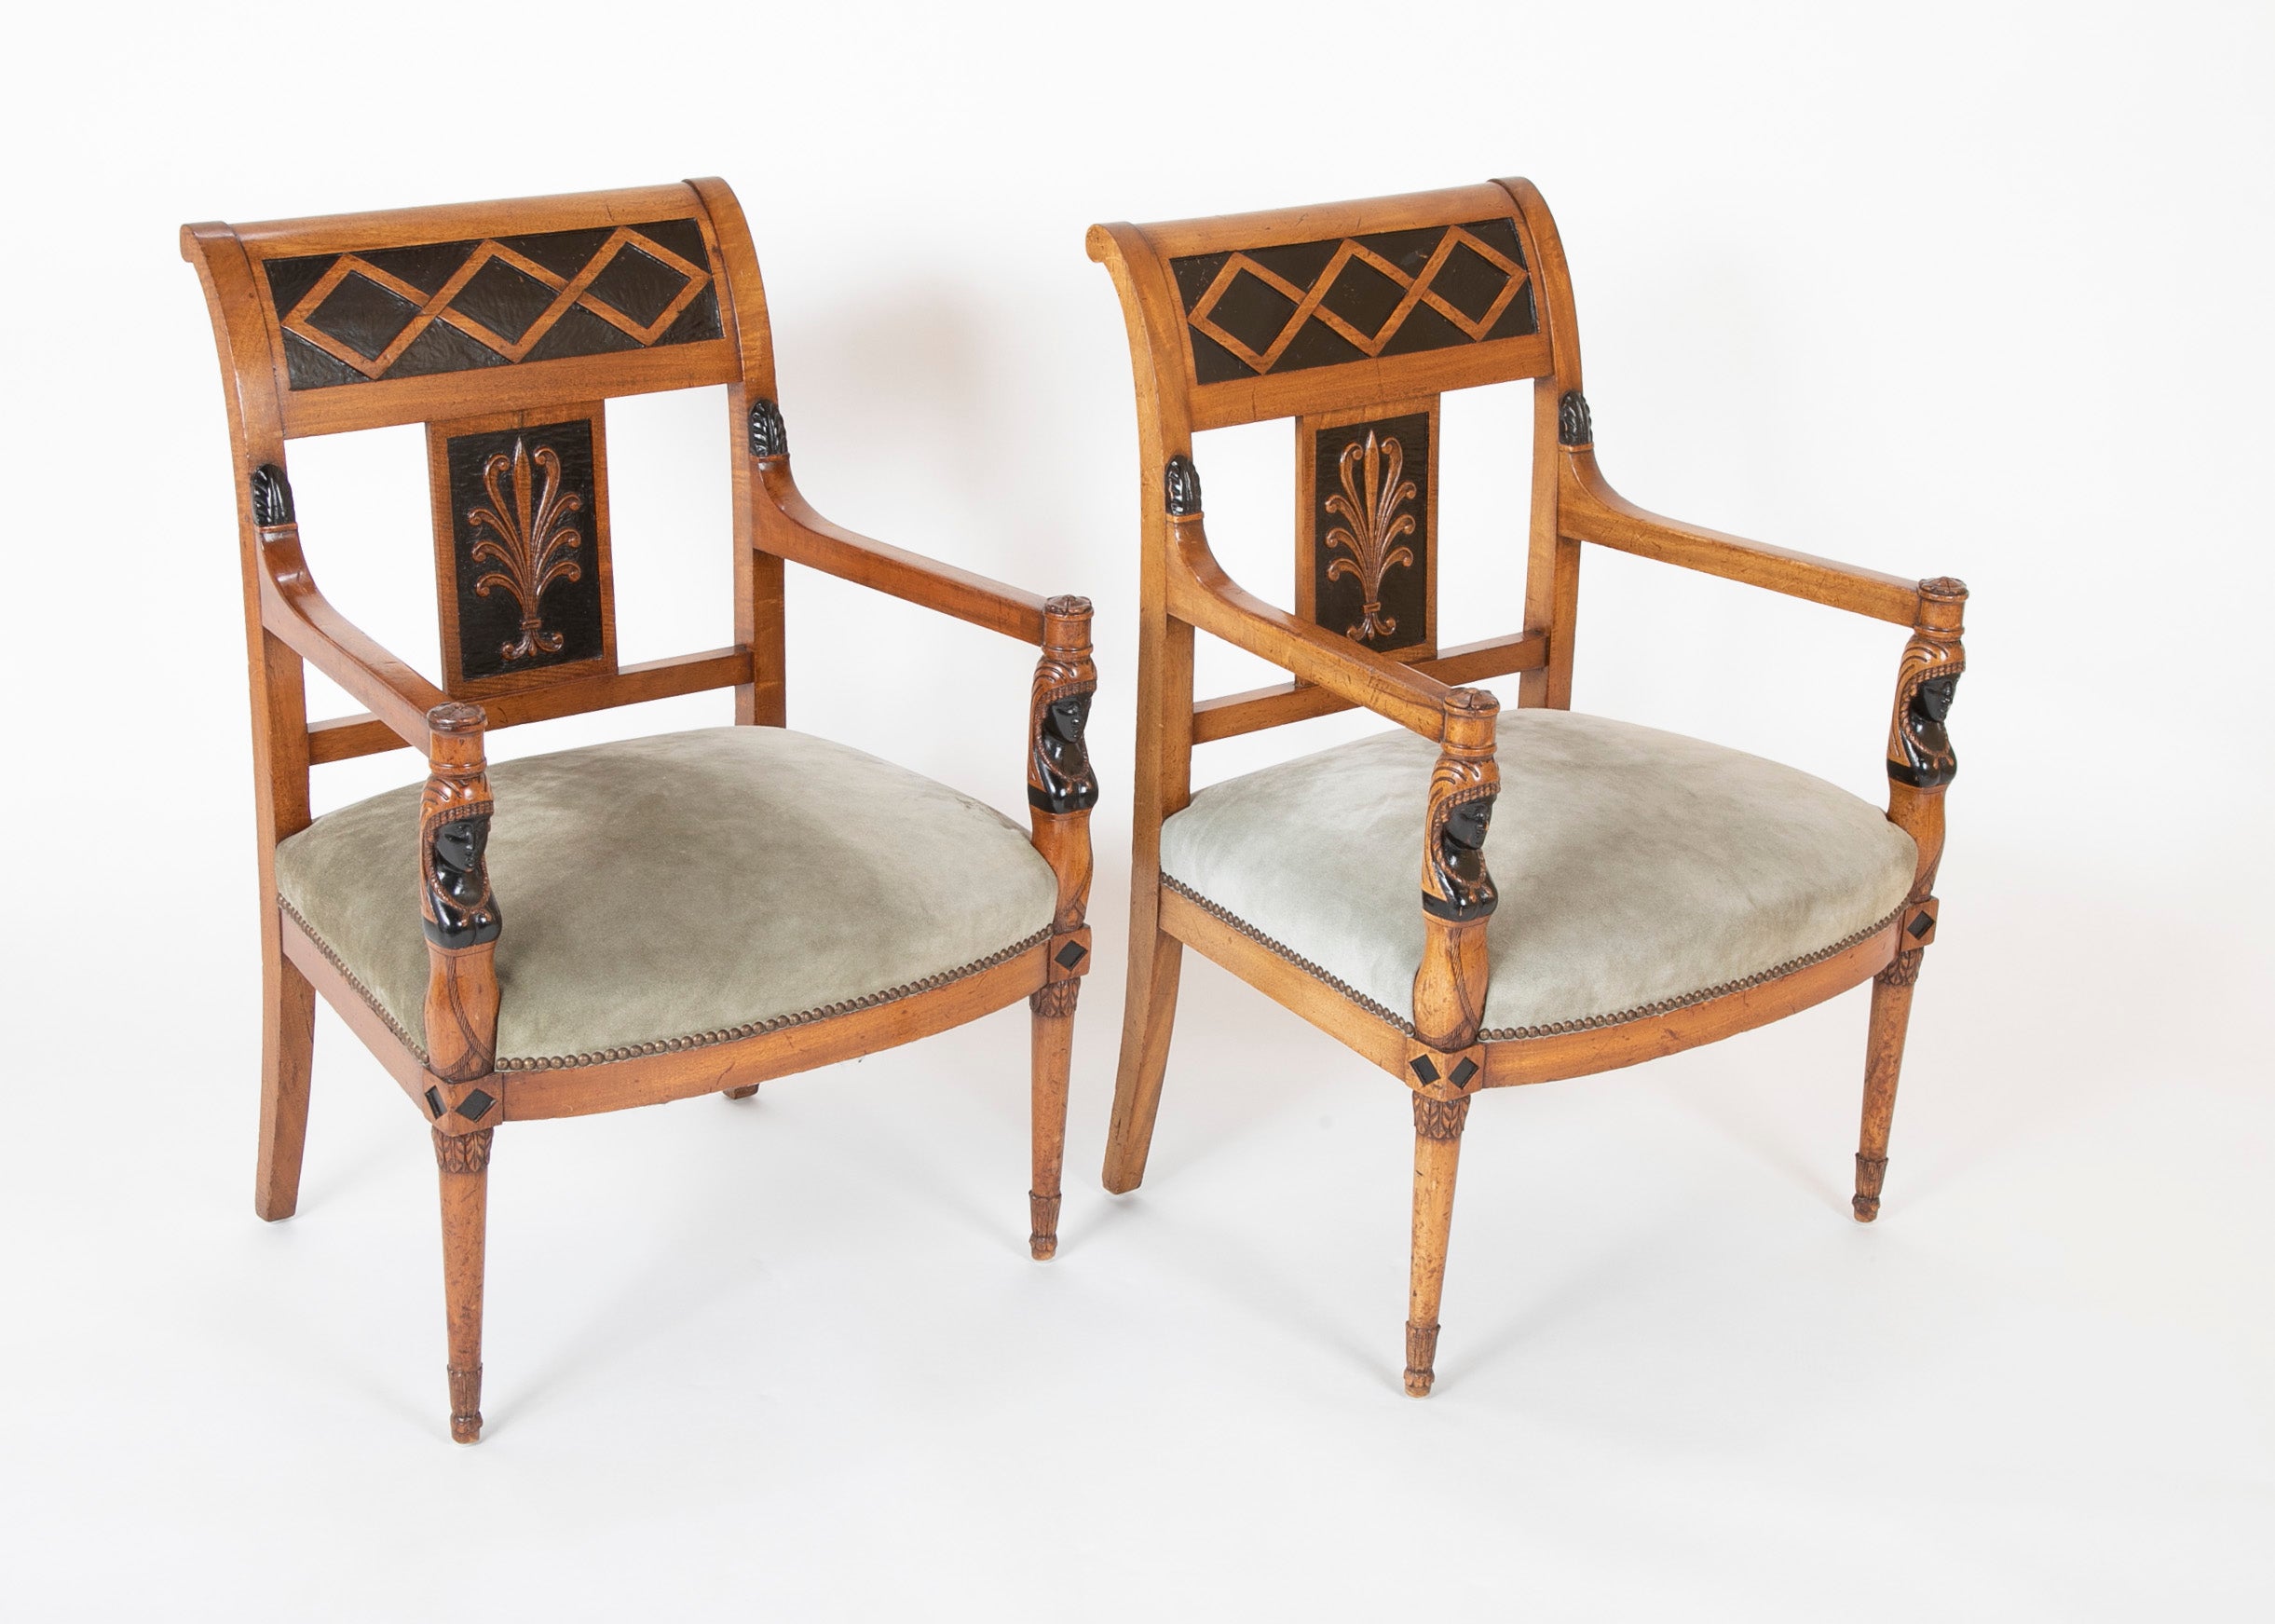 A Pair of Continental Neoclassical Chairs with Carved Egyptian Head on the Arm